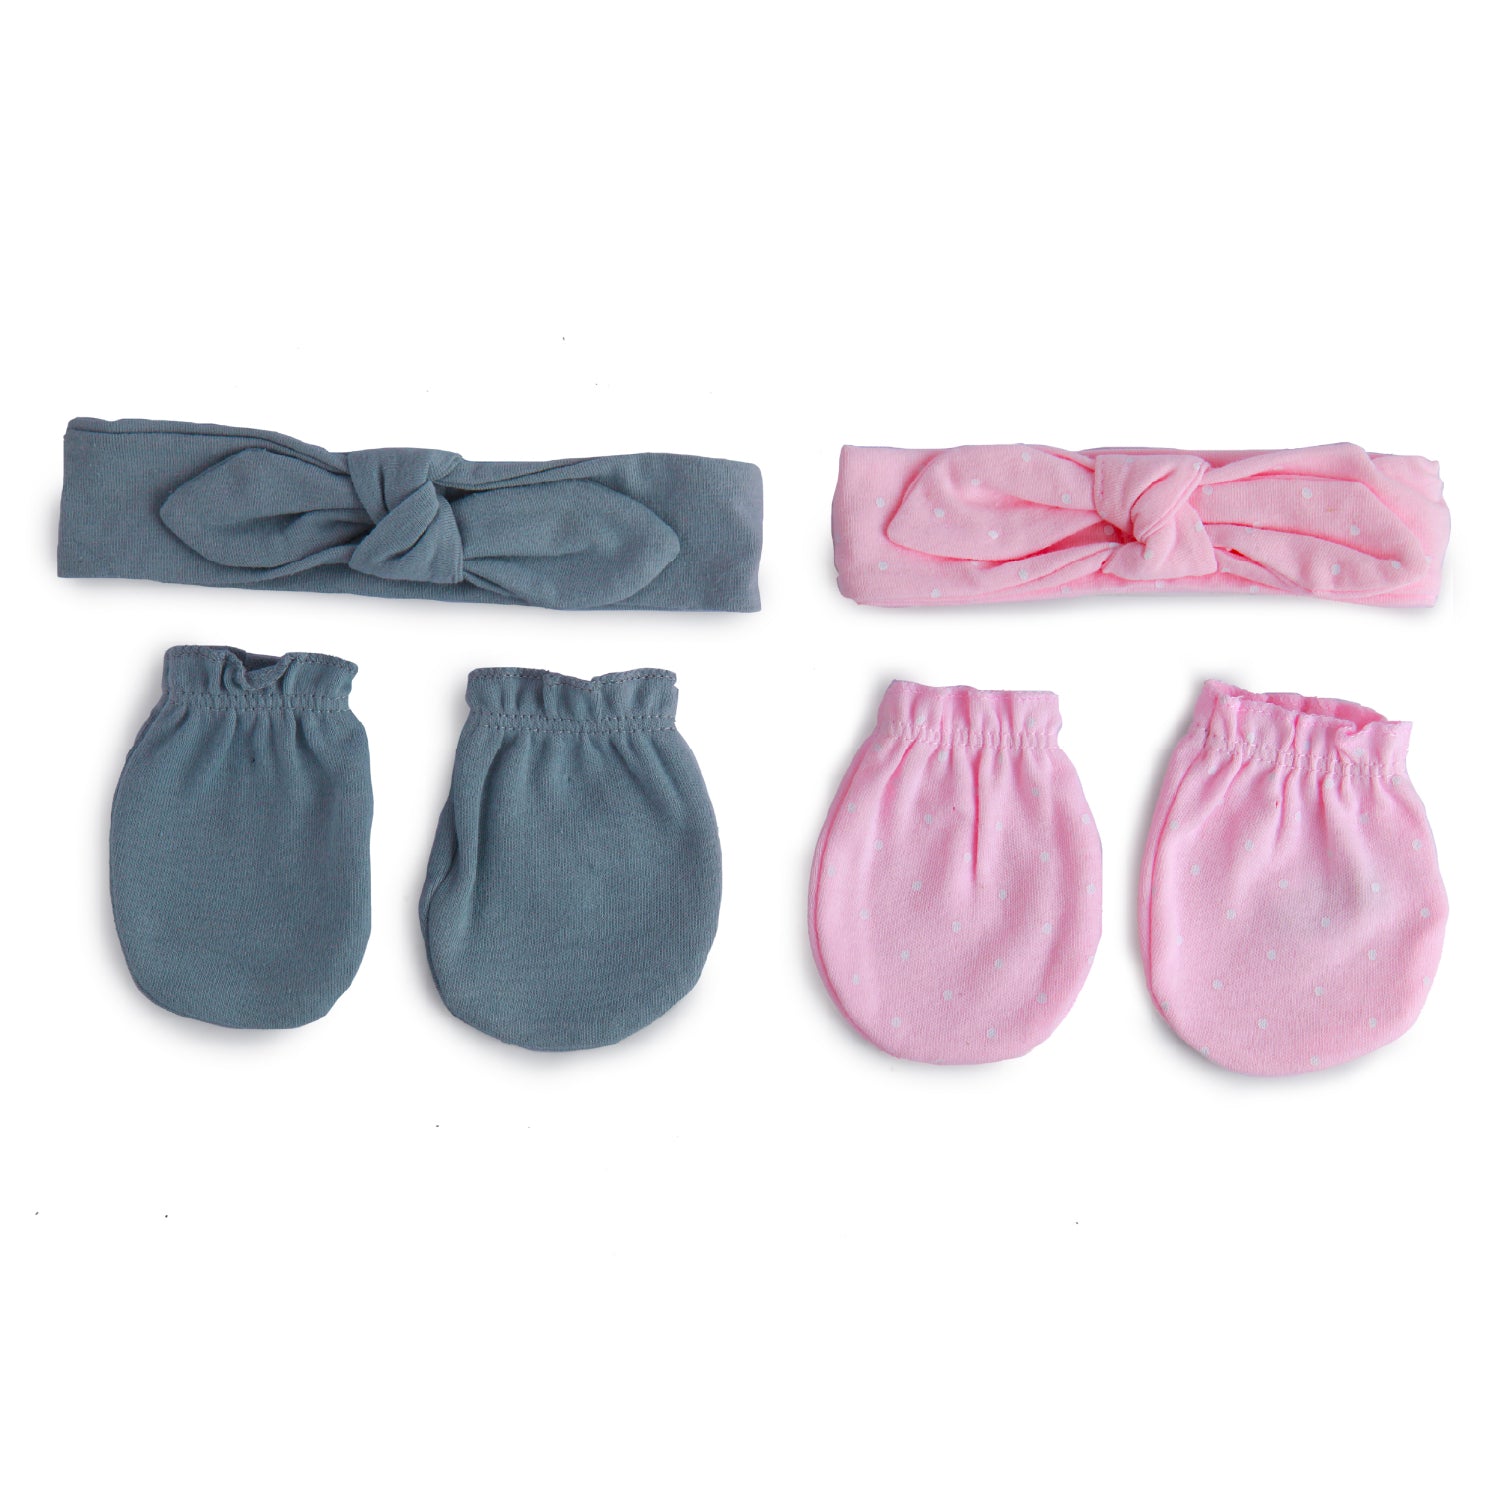 Matching Pink And Grey 3 Mittens And 3 Headbands Set - Baby Moo